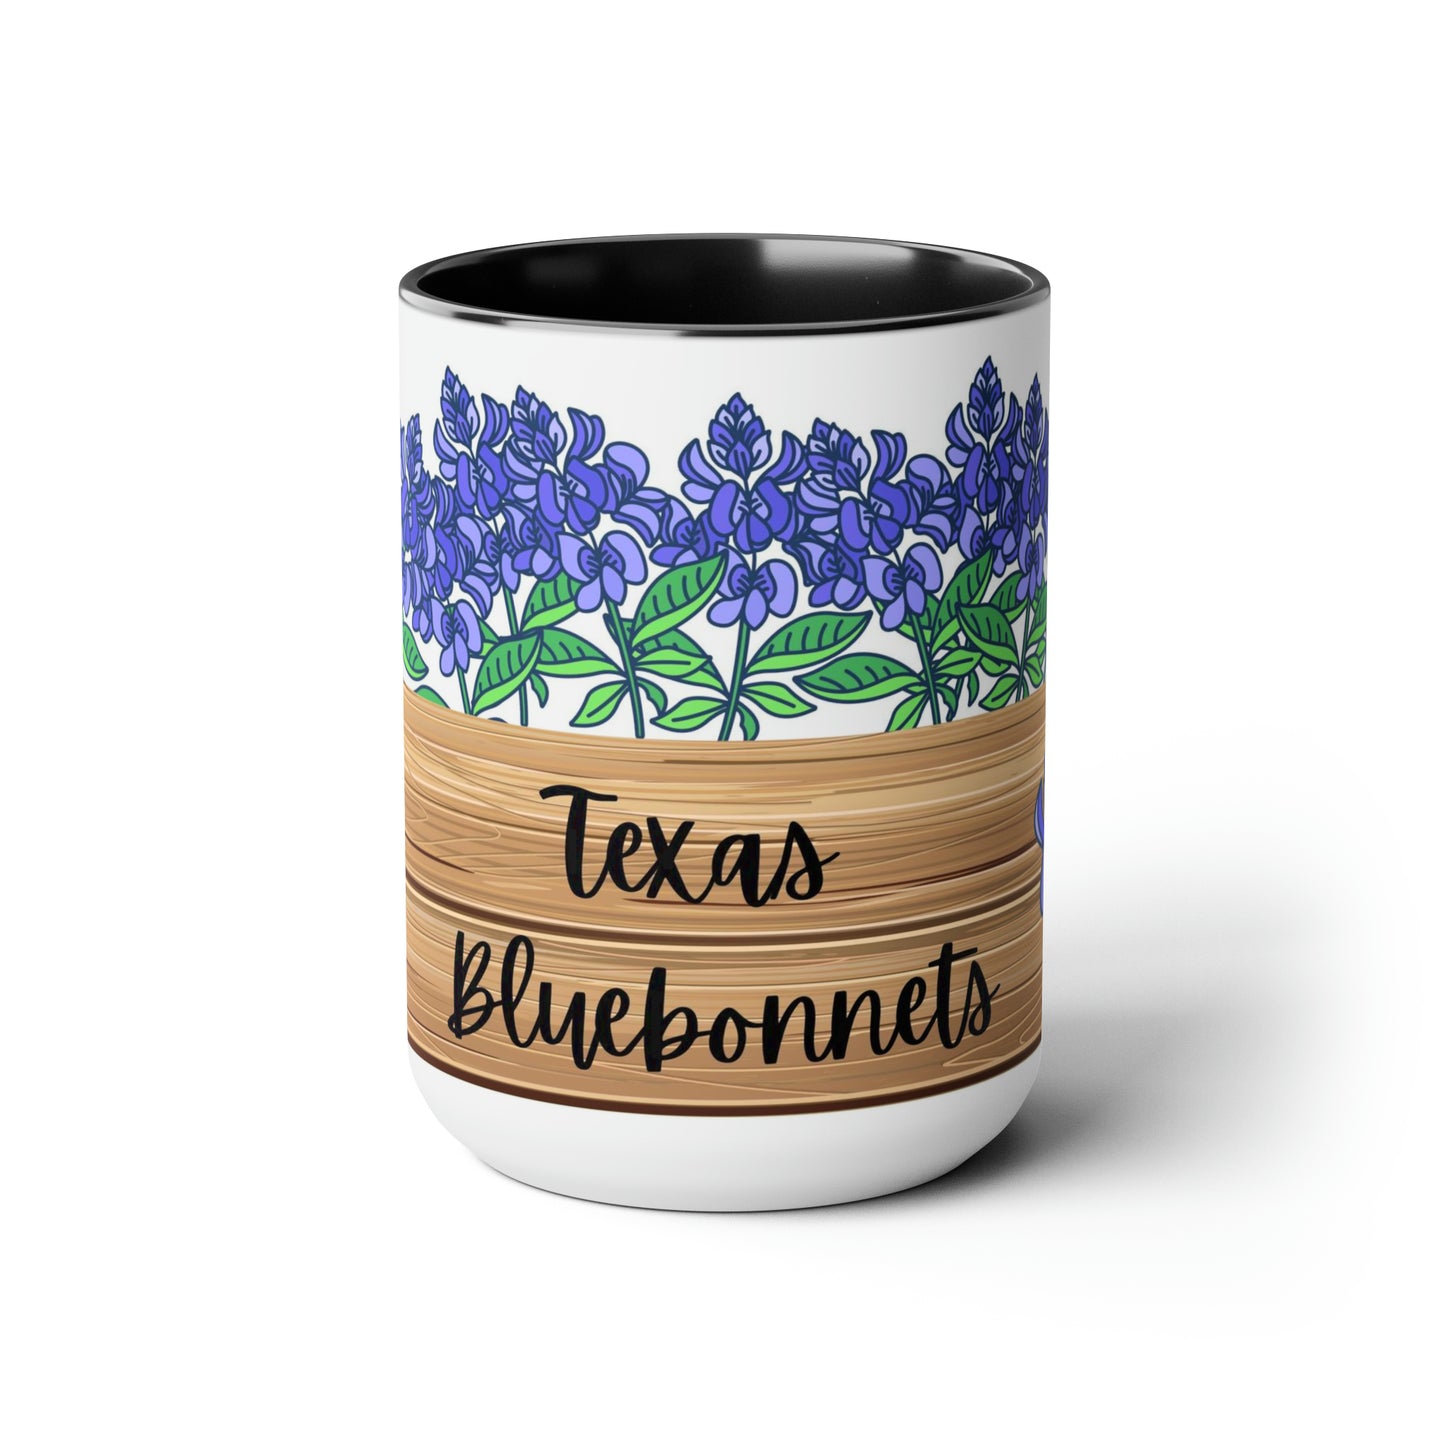 Texas Bluebonnets Two-Tone Coffee Mugs 15oz, Coffee Mug, Bluebonnets Coffee Mug, Texas Coffee Mug, Gifts Under 20, Gifts For Her, Bluebonnet